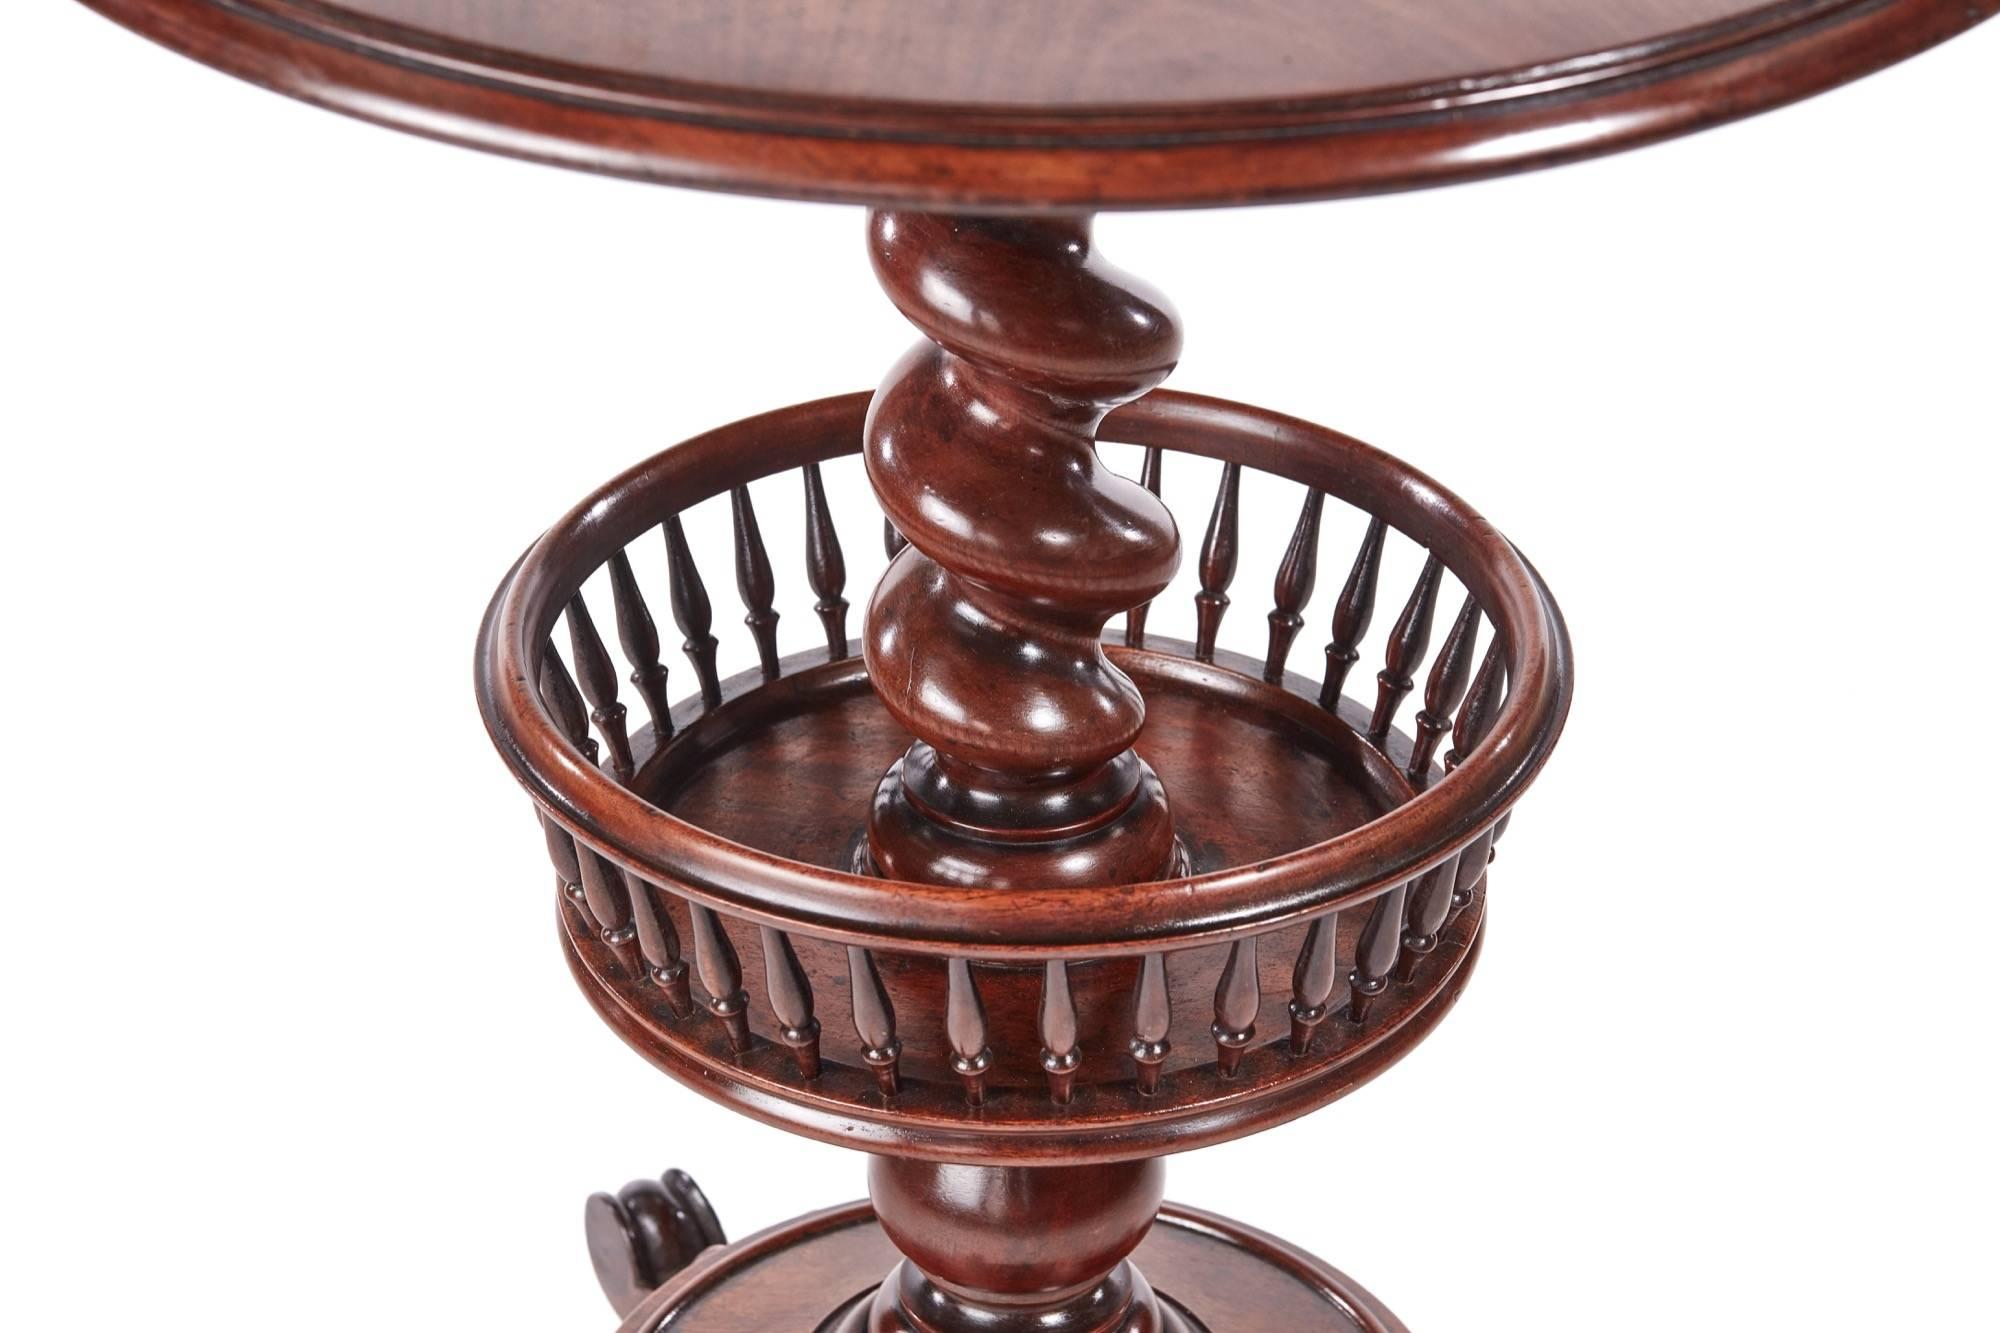 Large William IV mahogany occasional or lamp table with a quality circular top raised upon a substantial barley twist stem with rotating under tier basket having fine turned spindles on a platform base with three scroll feet
Fantastic color and